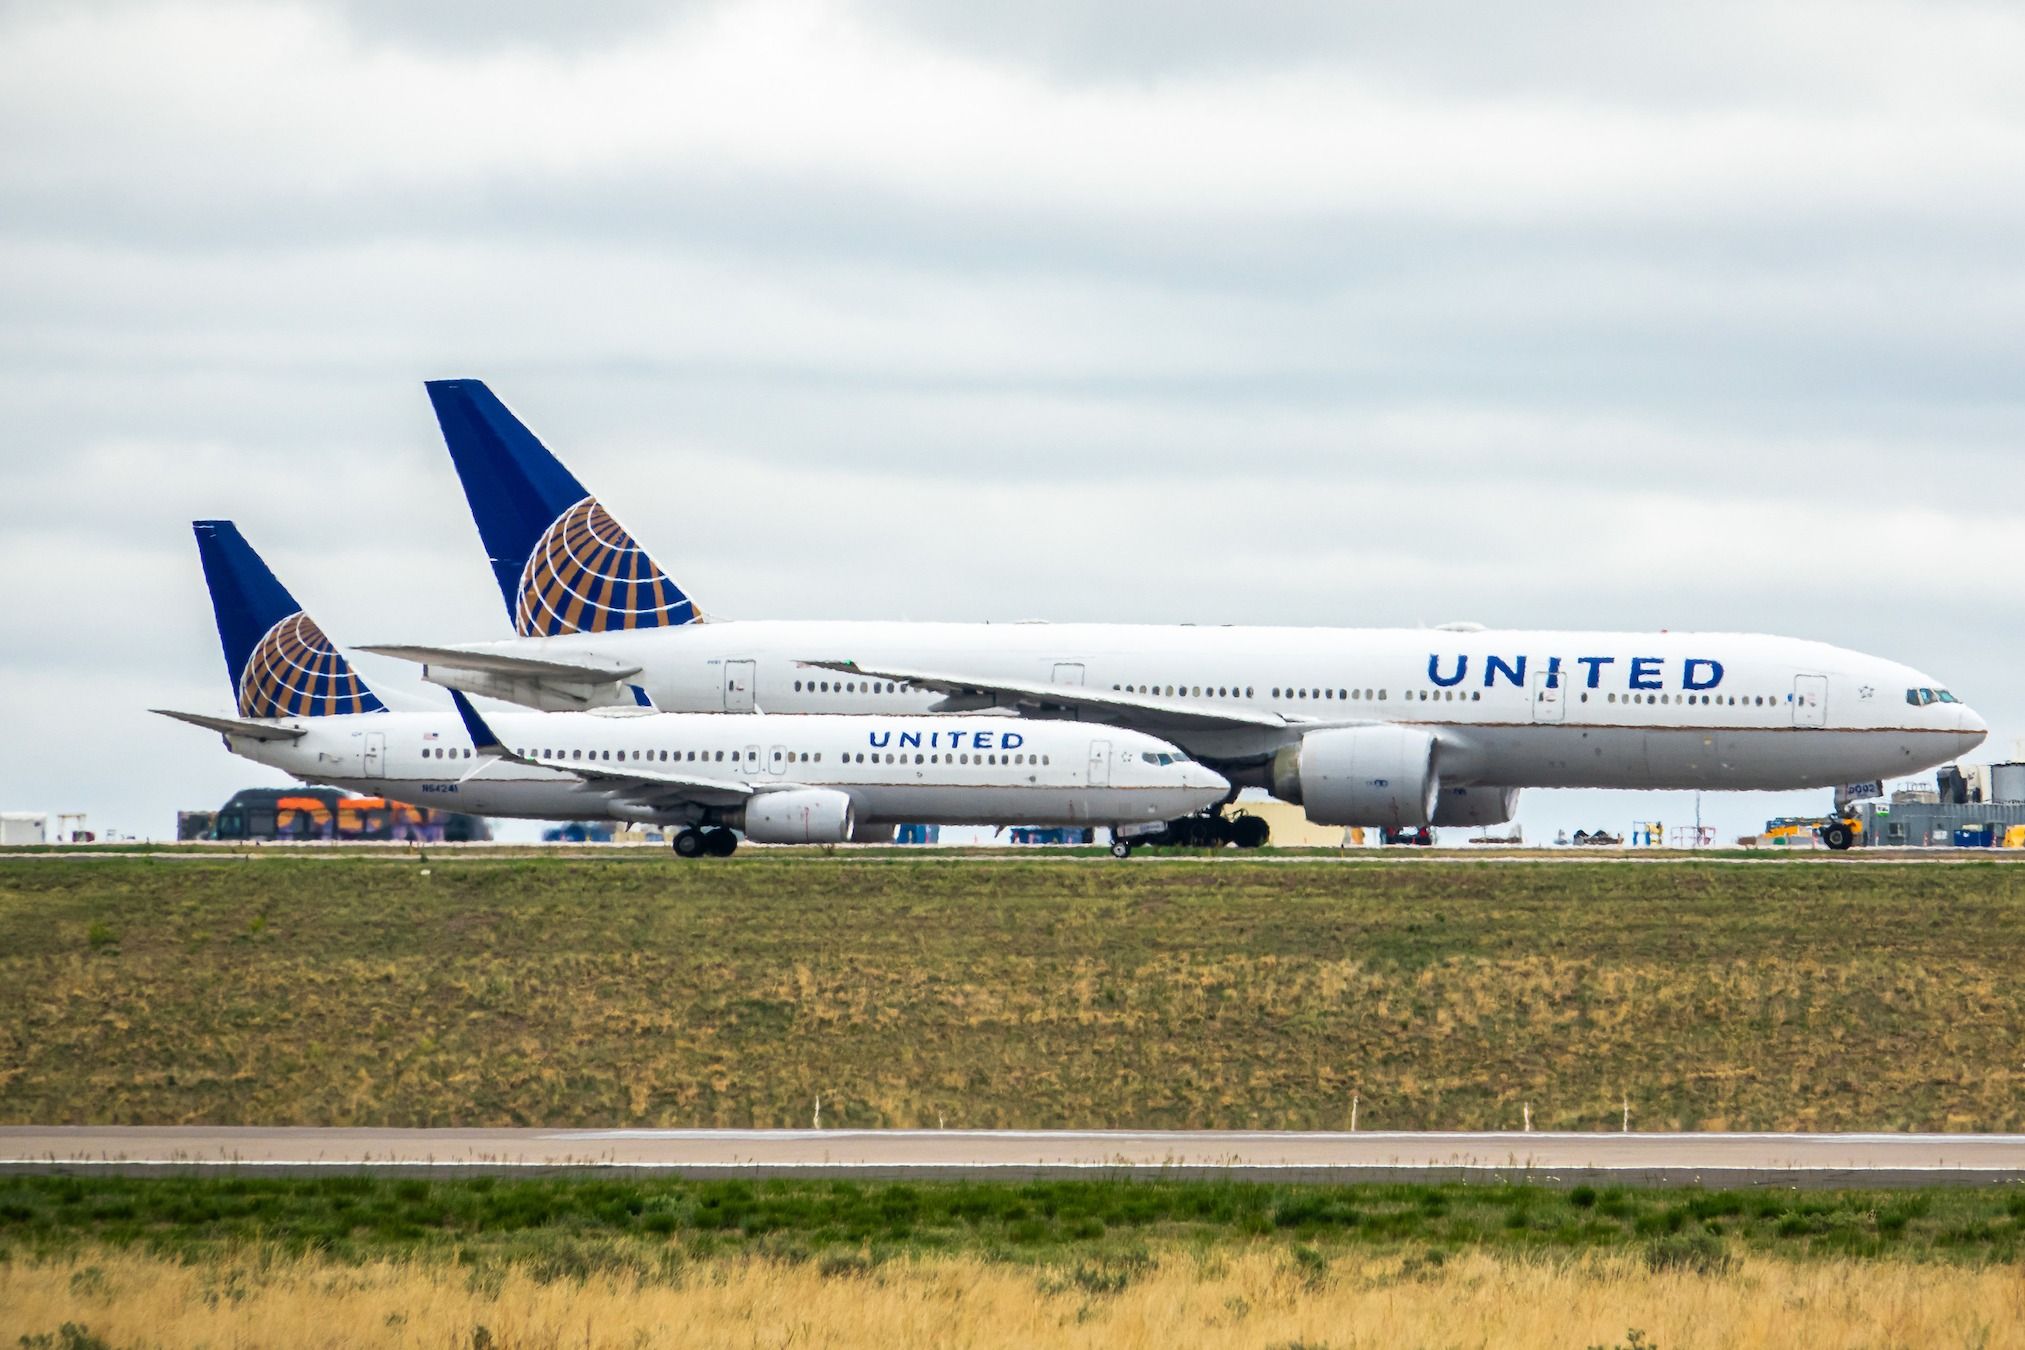 United Airlines Boeing 777-200 and 737-800 at Denver International Airport.